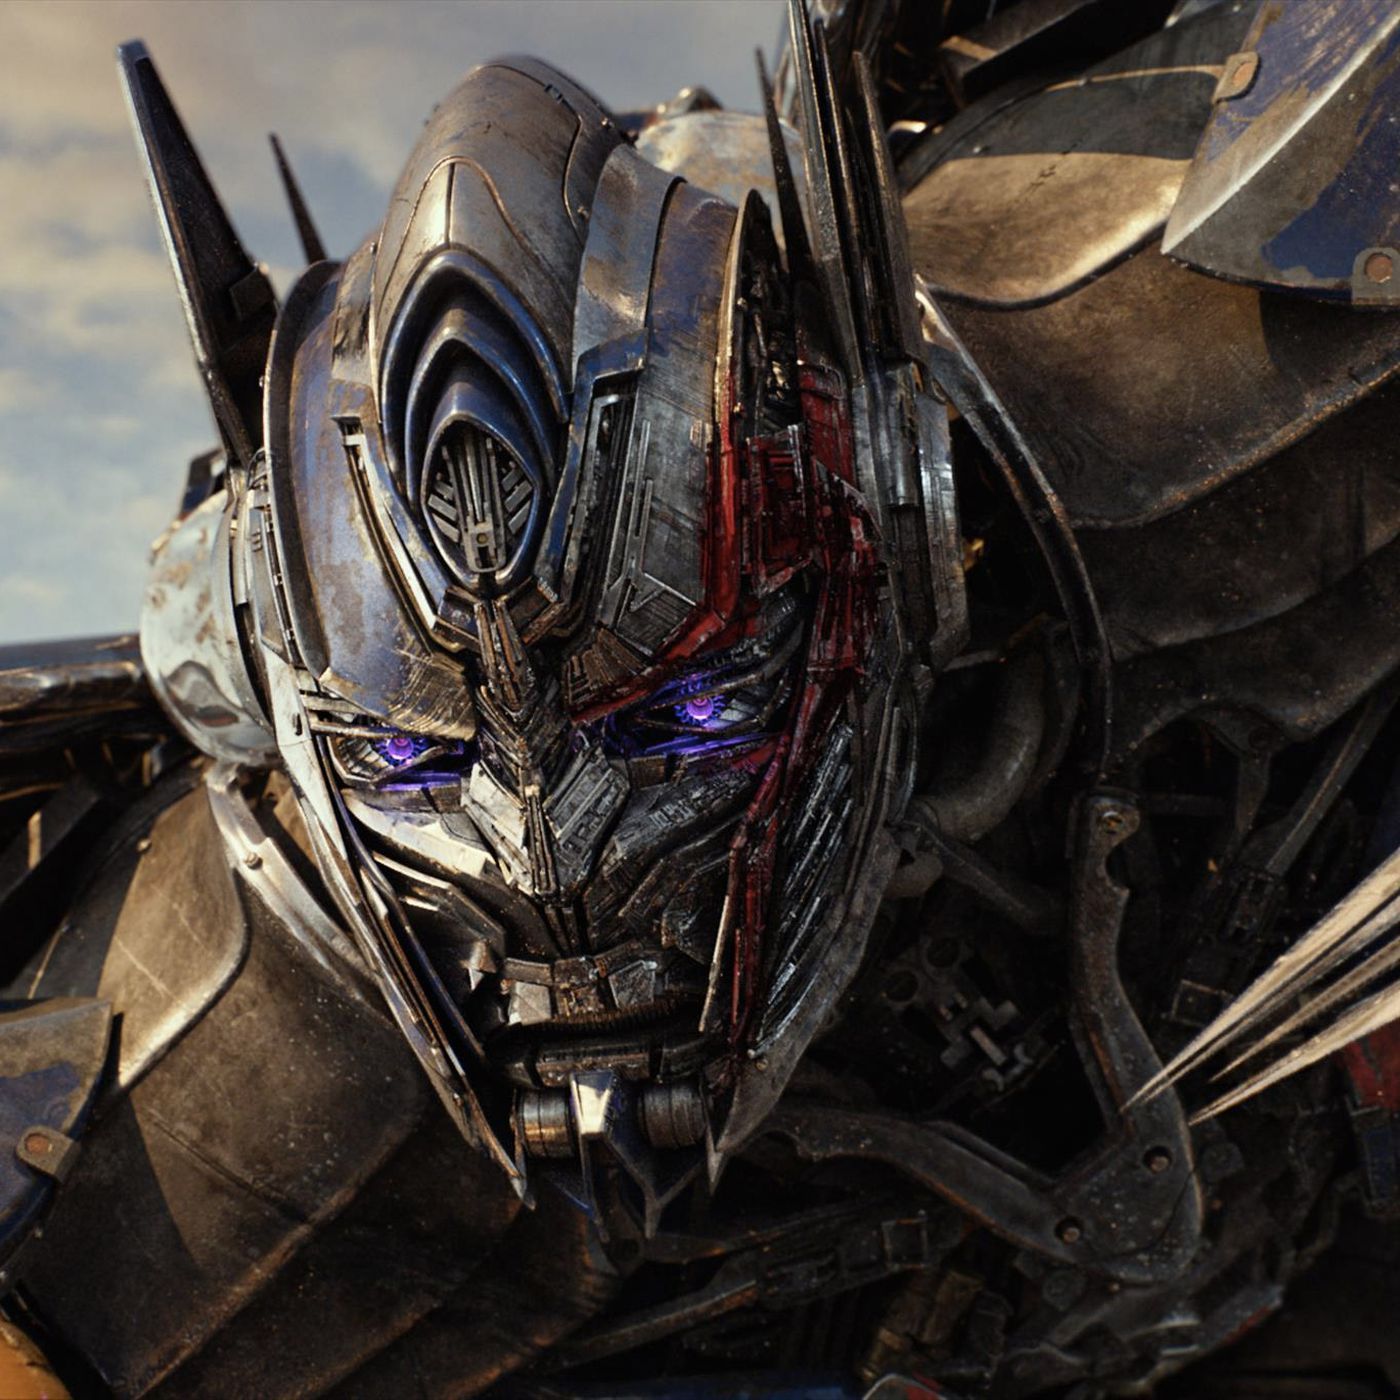 Report: Transformers movie franchise 'reset' in the works